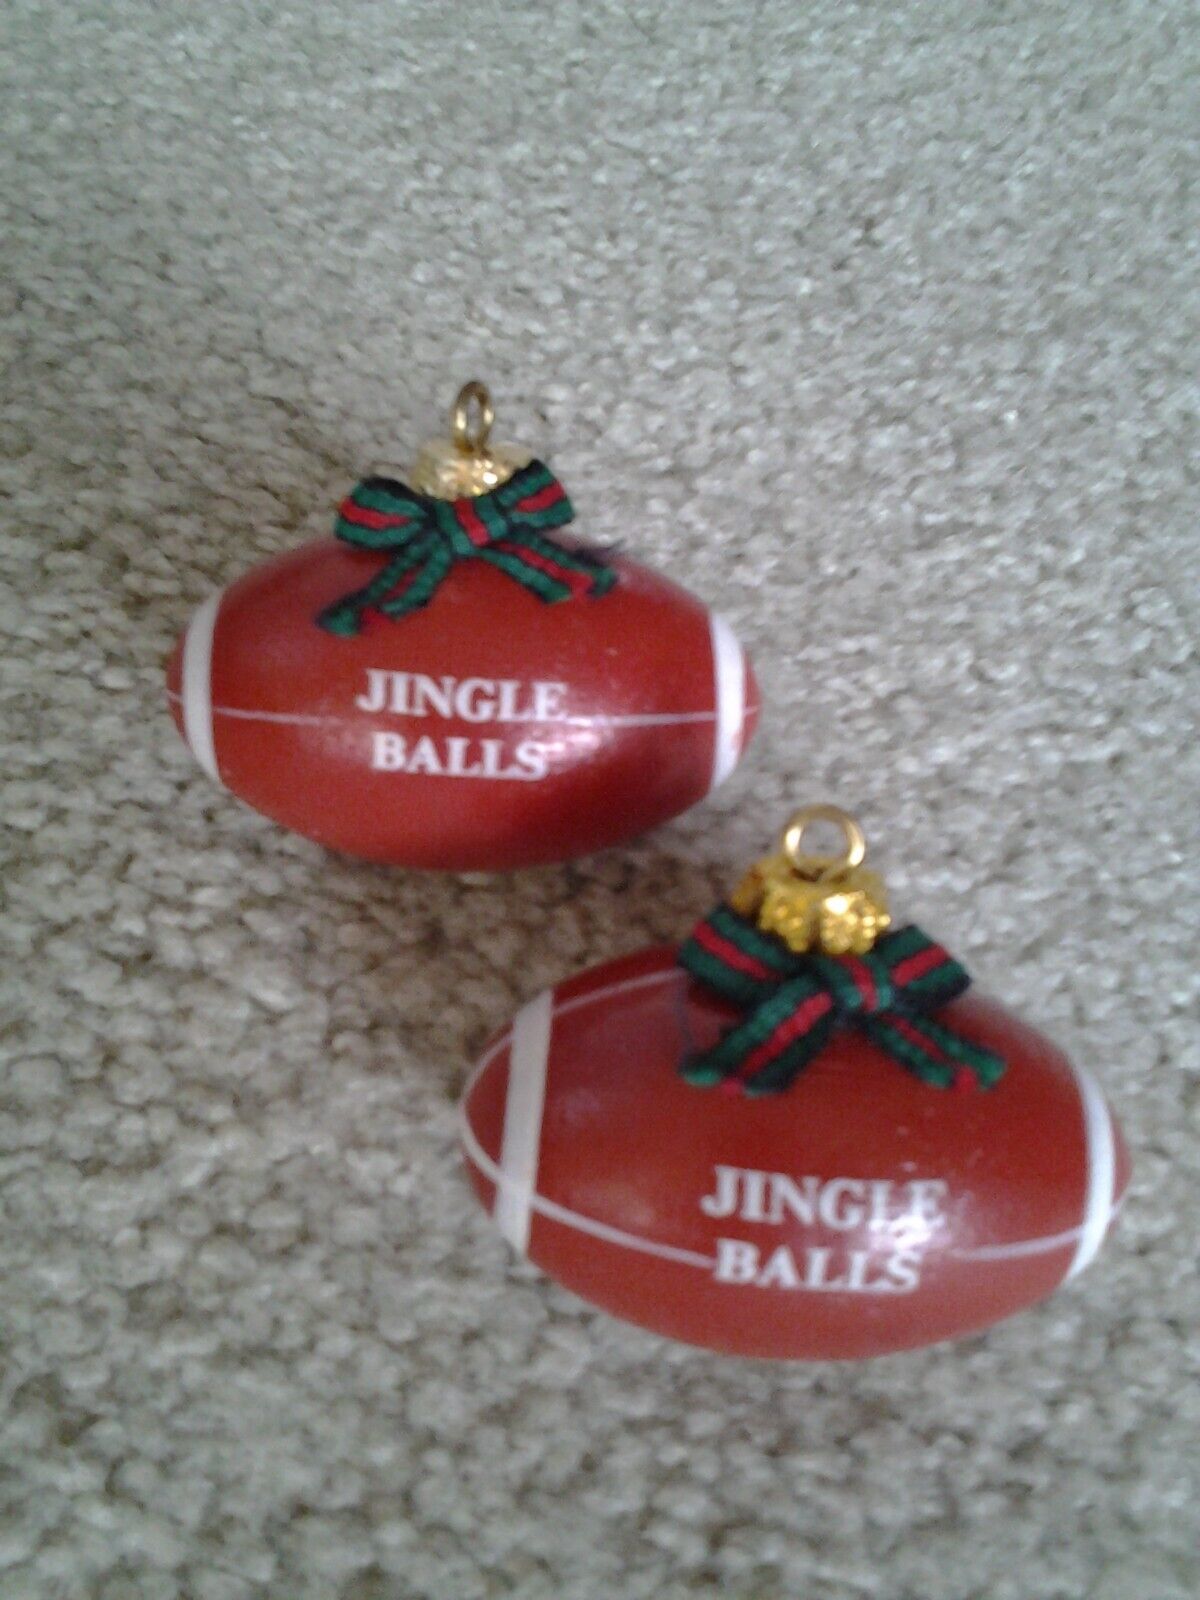 JINGLE BALLS vintage wooden FOOTBALL hanging ornaments with ribbons by Papal Co